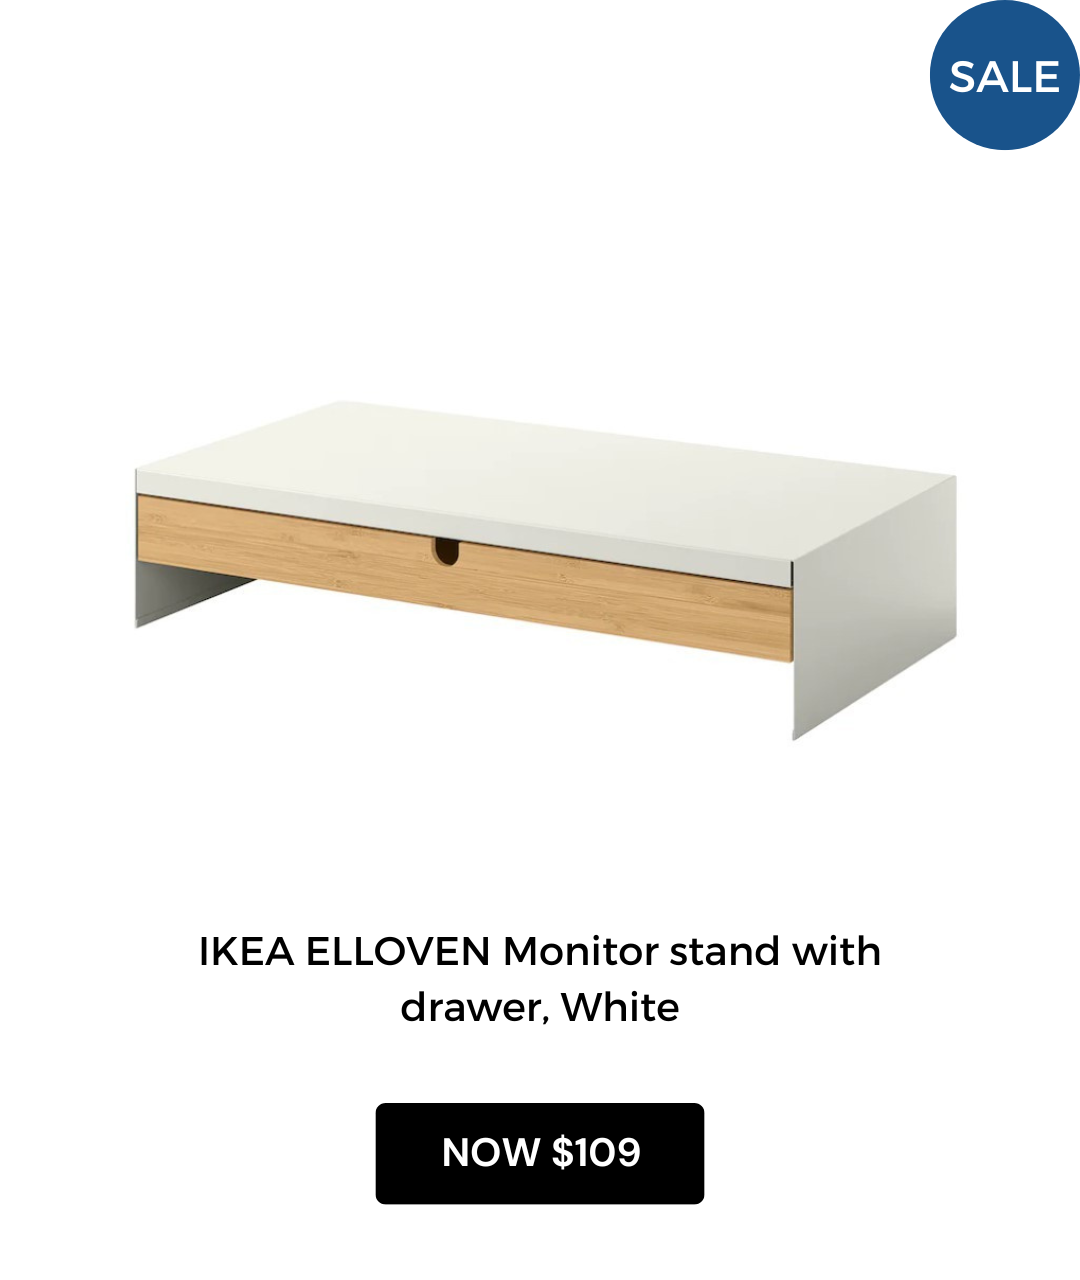 IKEA ELLOVEN Monitor stand with drawer, White